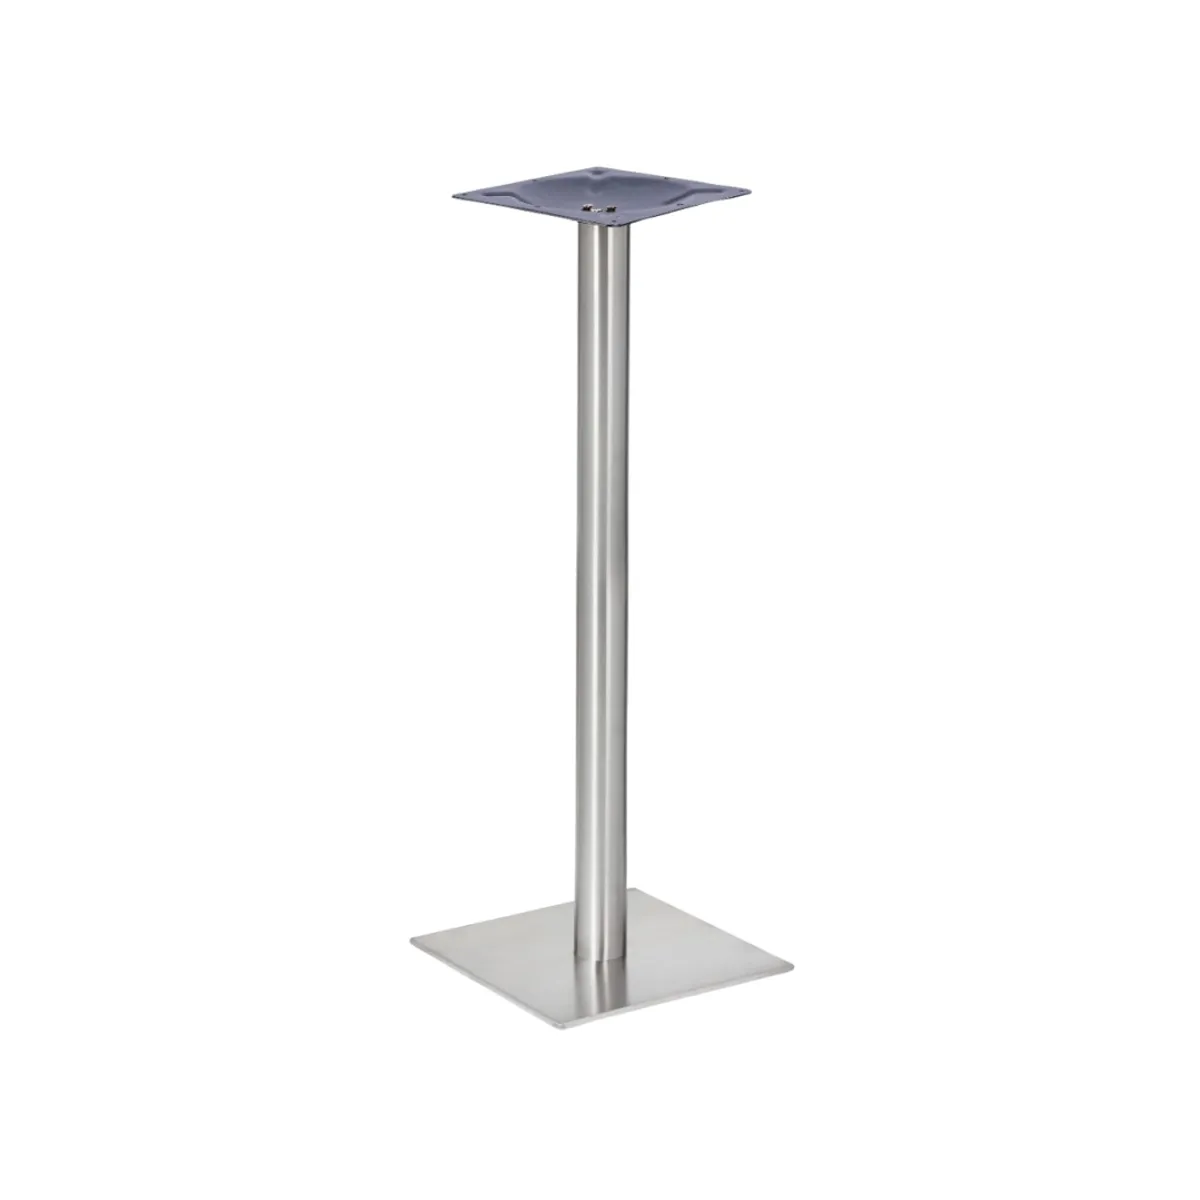 Flat square table base with round column 3